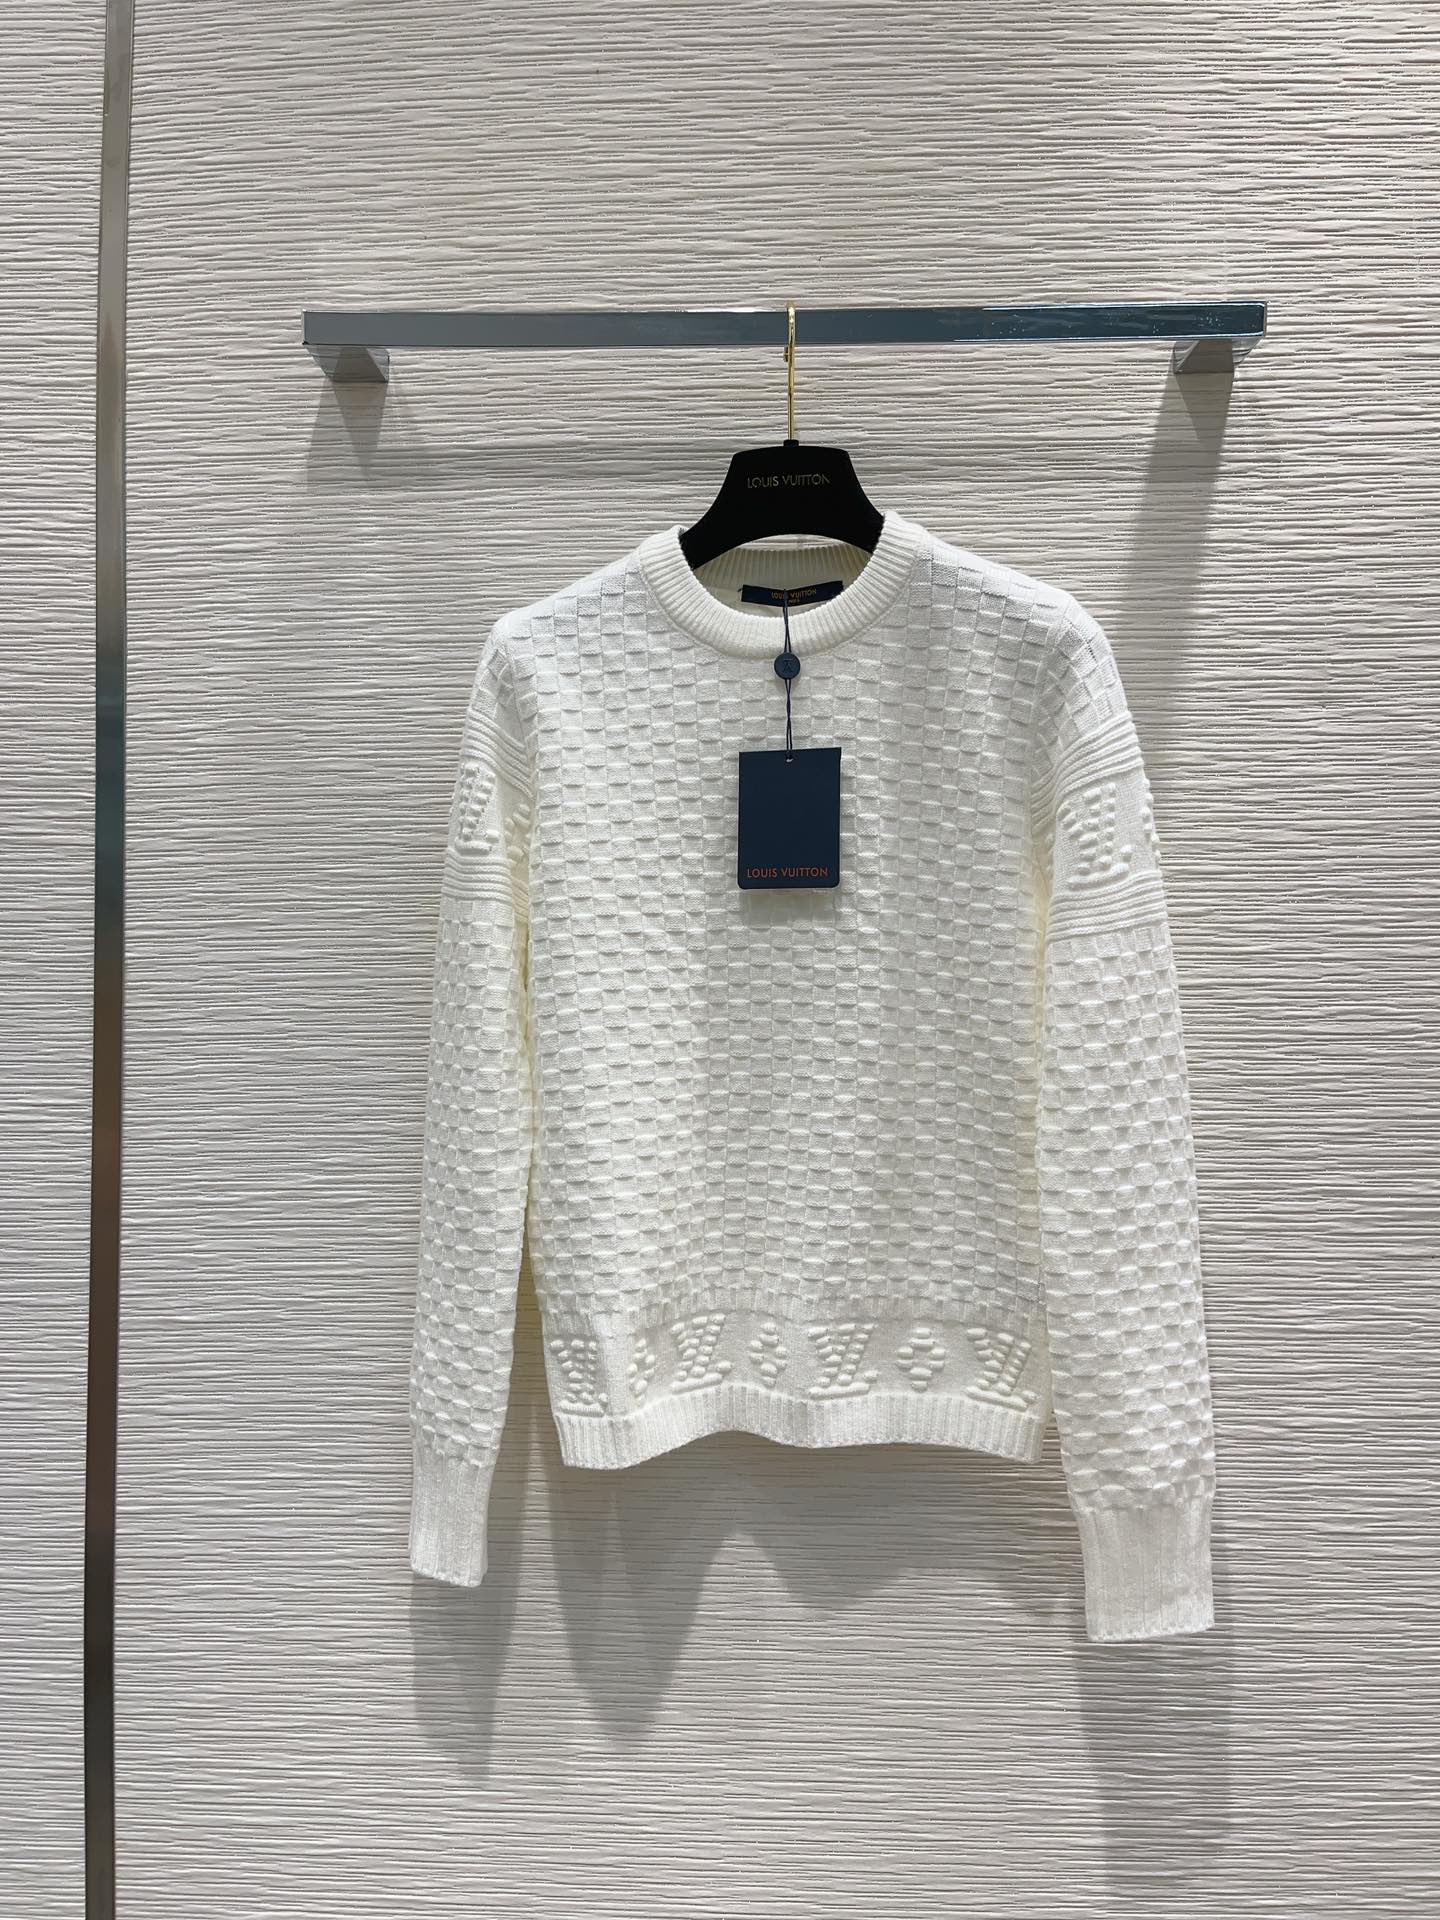 Louis Vuitton Clothing Sweatshirts White Wool Fall/Winter Collection